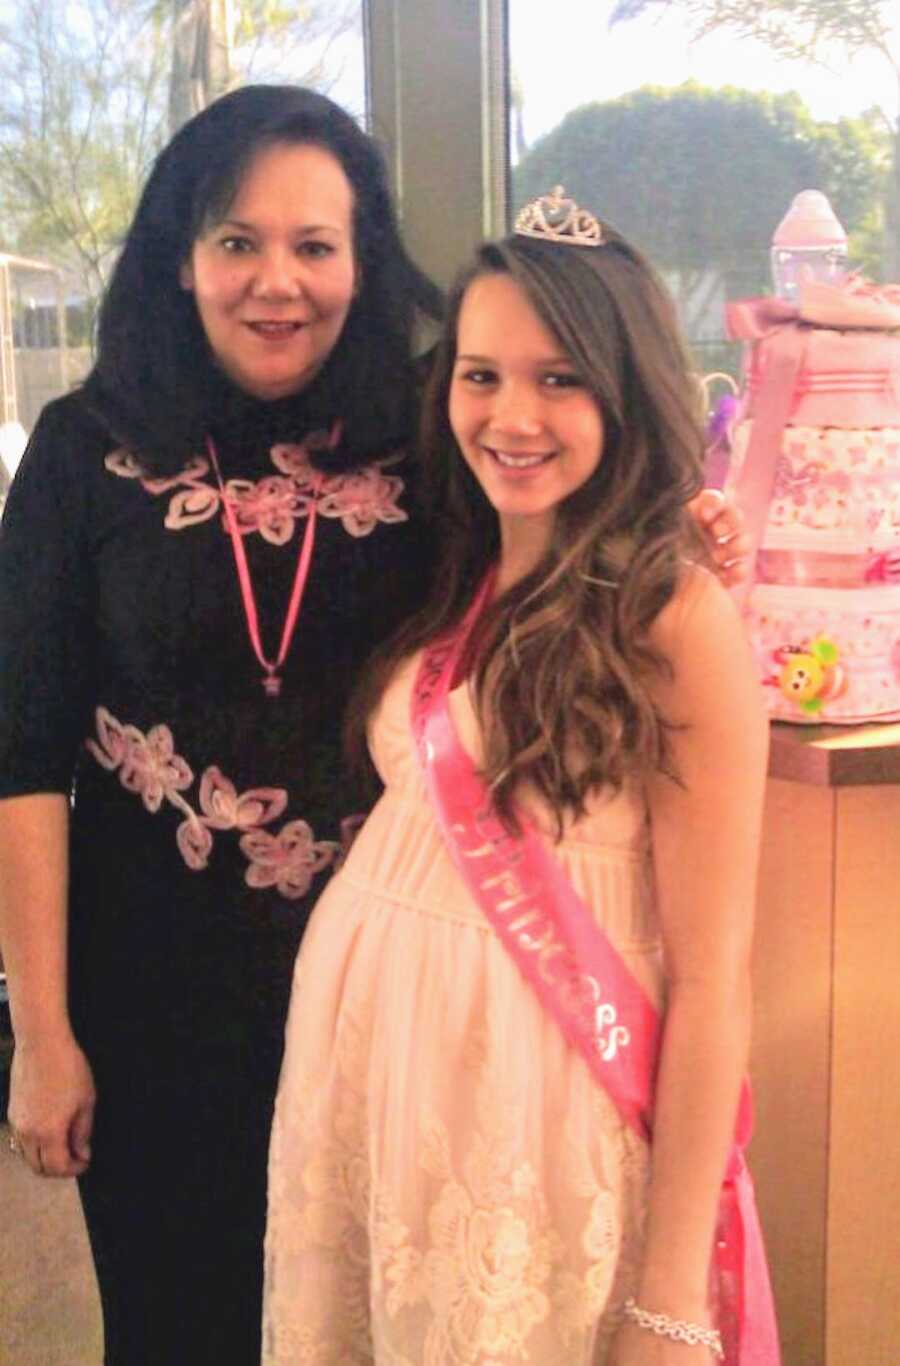 pregnant team mom poses with family member at her baby shower, she is wearing a sash and a crown